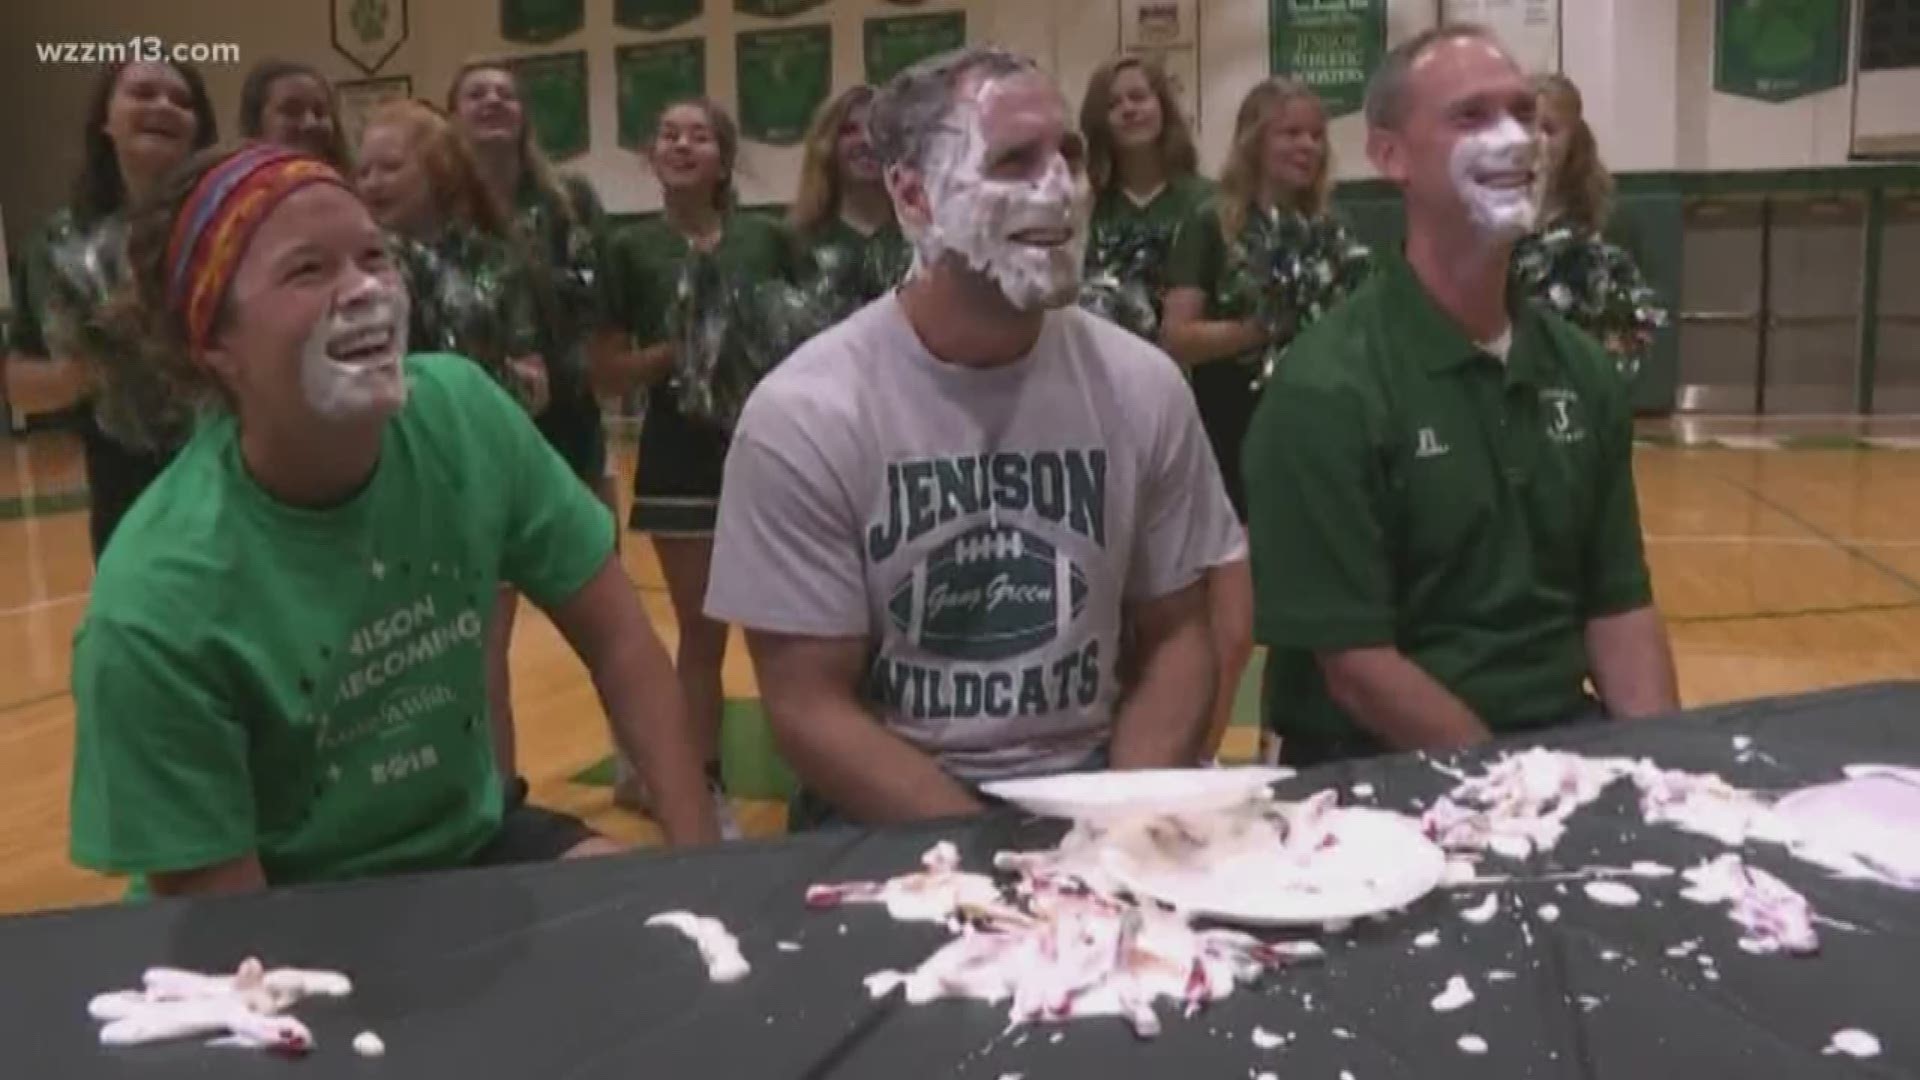 Sunrise Sidelines: The messy game at Jenison